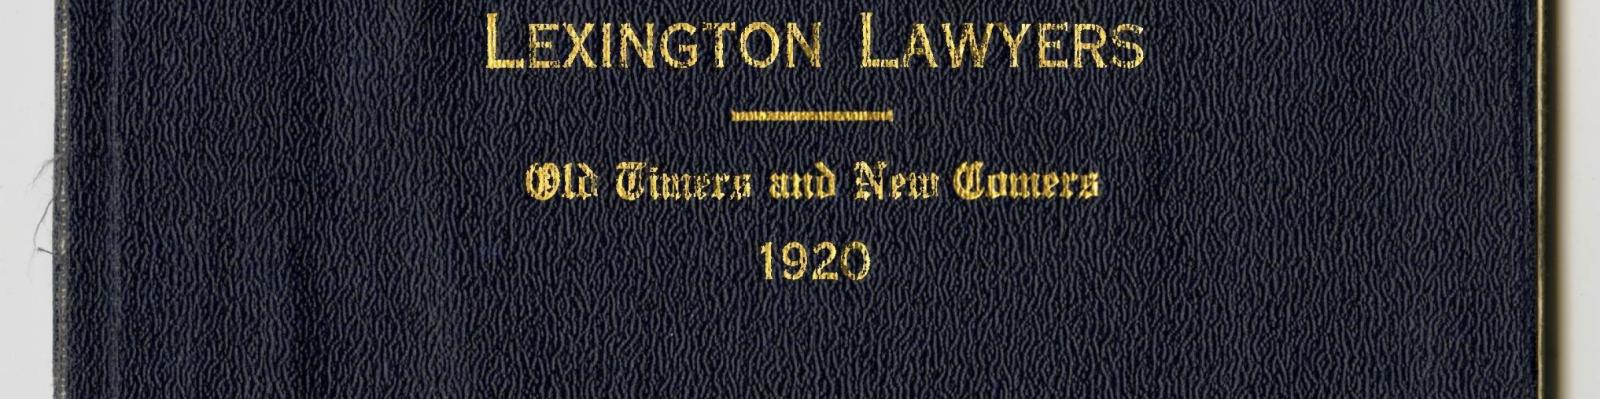 a record of lexington lawyers, old timers and newcomers